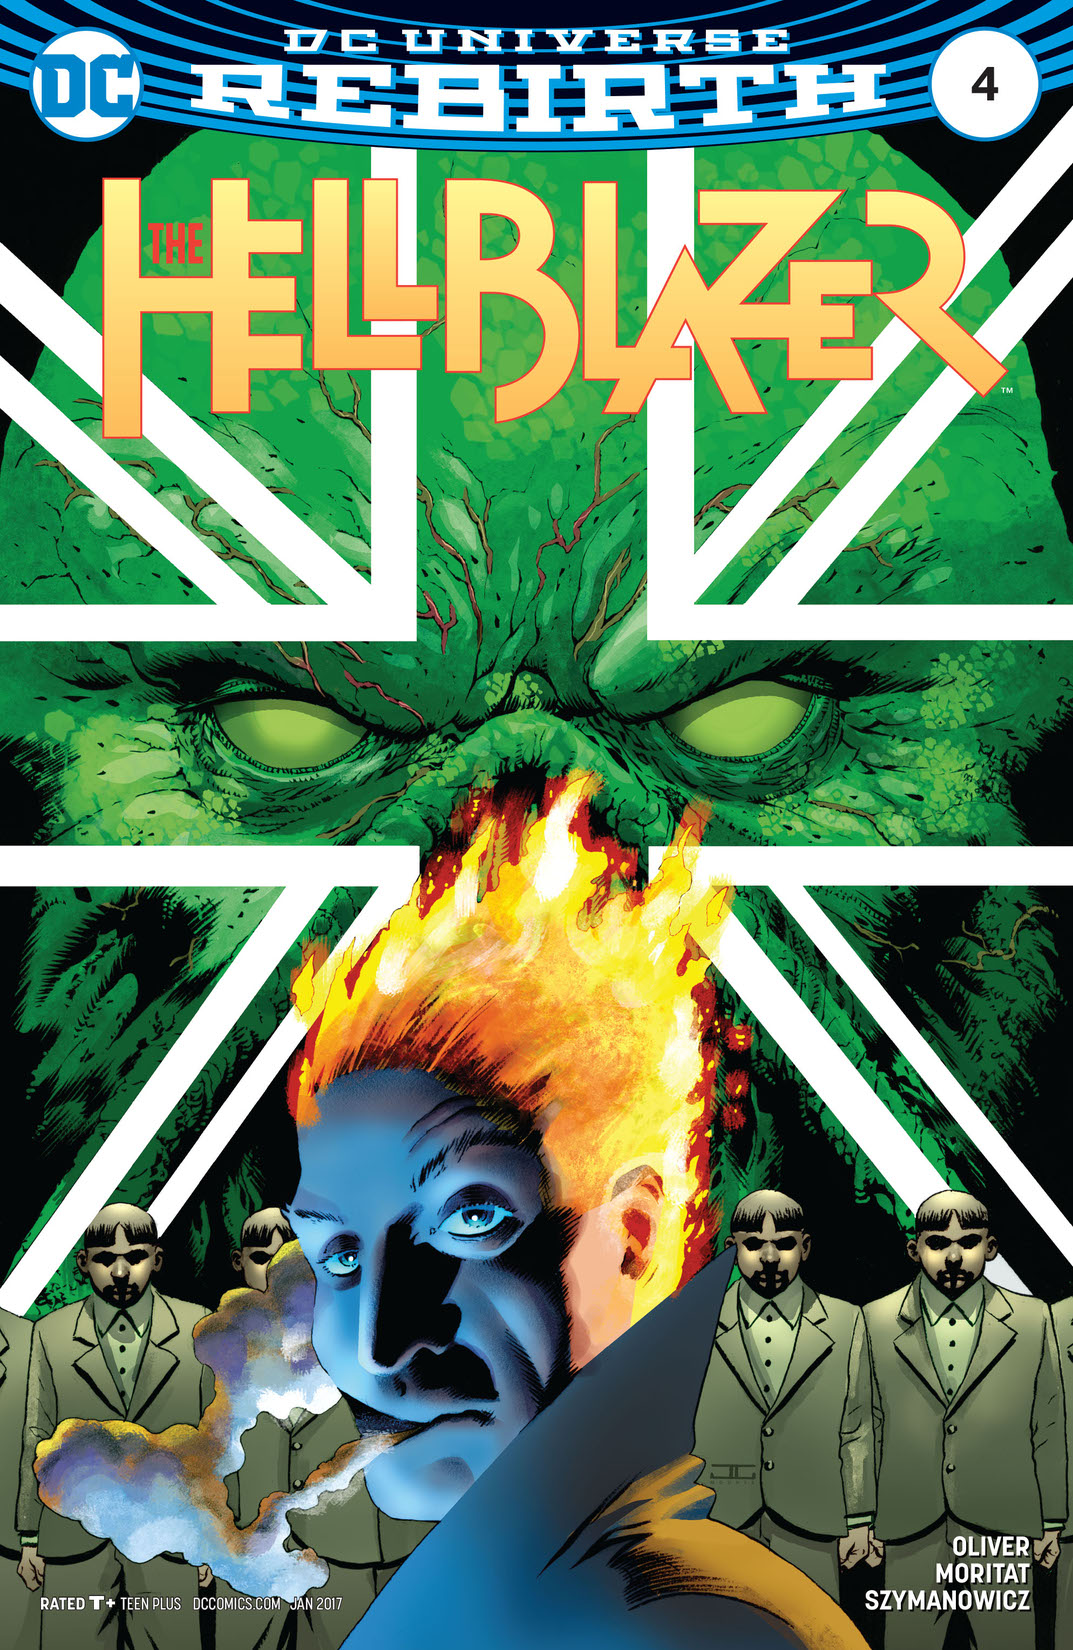 The Hellblazer #4 preview images